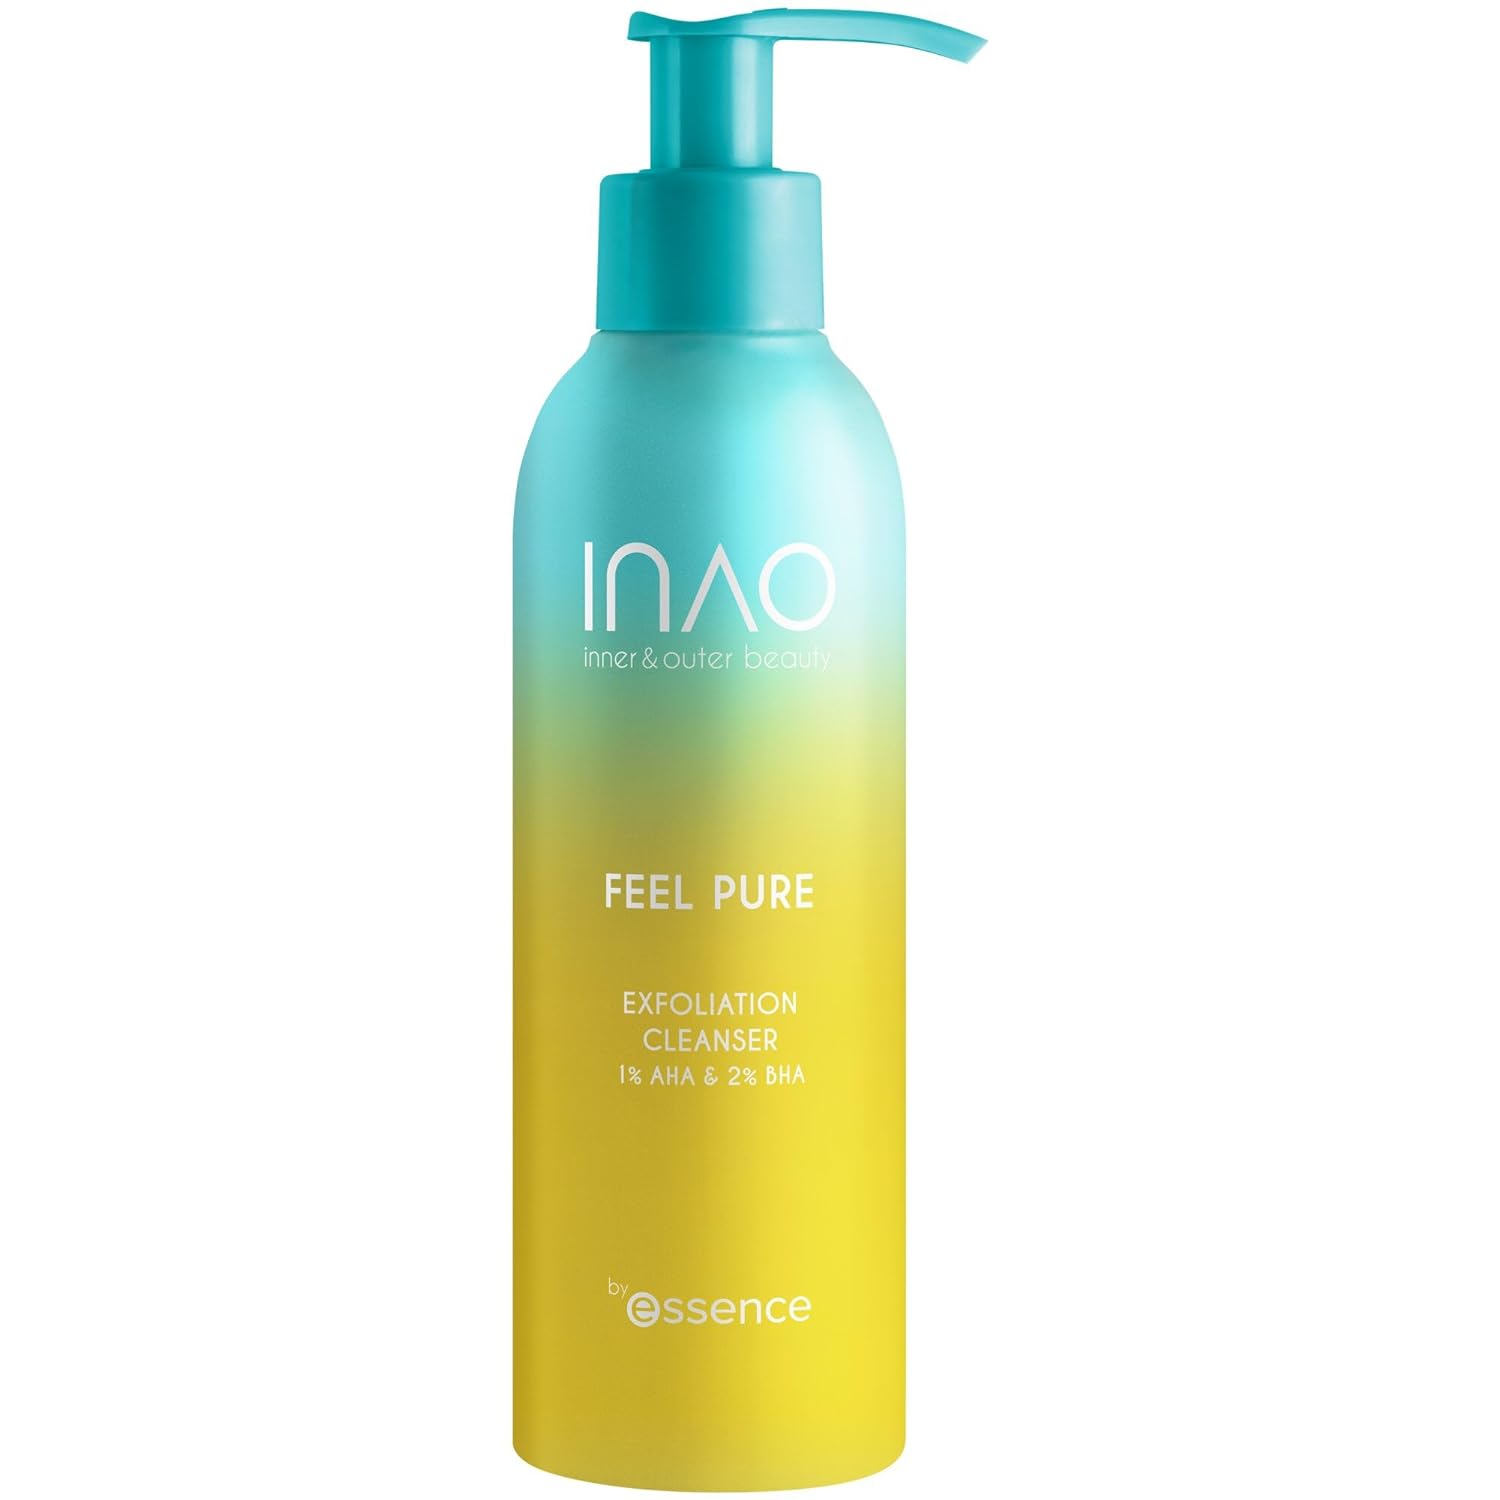 INAO Skincare Feel Pure Exfoliation Cleanser Gel Facial Cleanser with AHA, BHA & Niacinamide Mild Face Cleansing for Radiant Skin Complexion Exfoliating, Cleansing, Smoothing